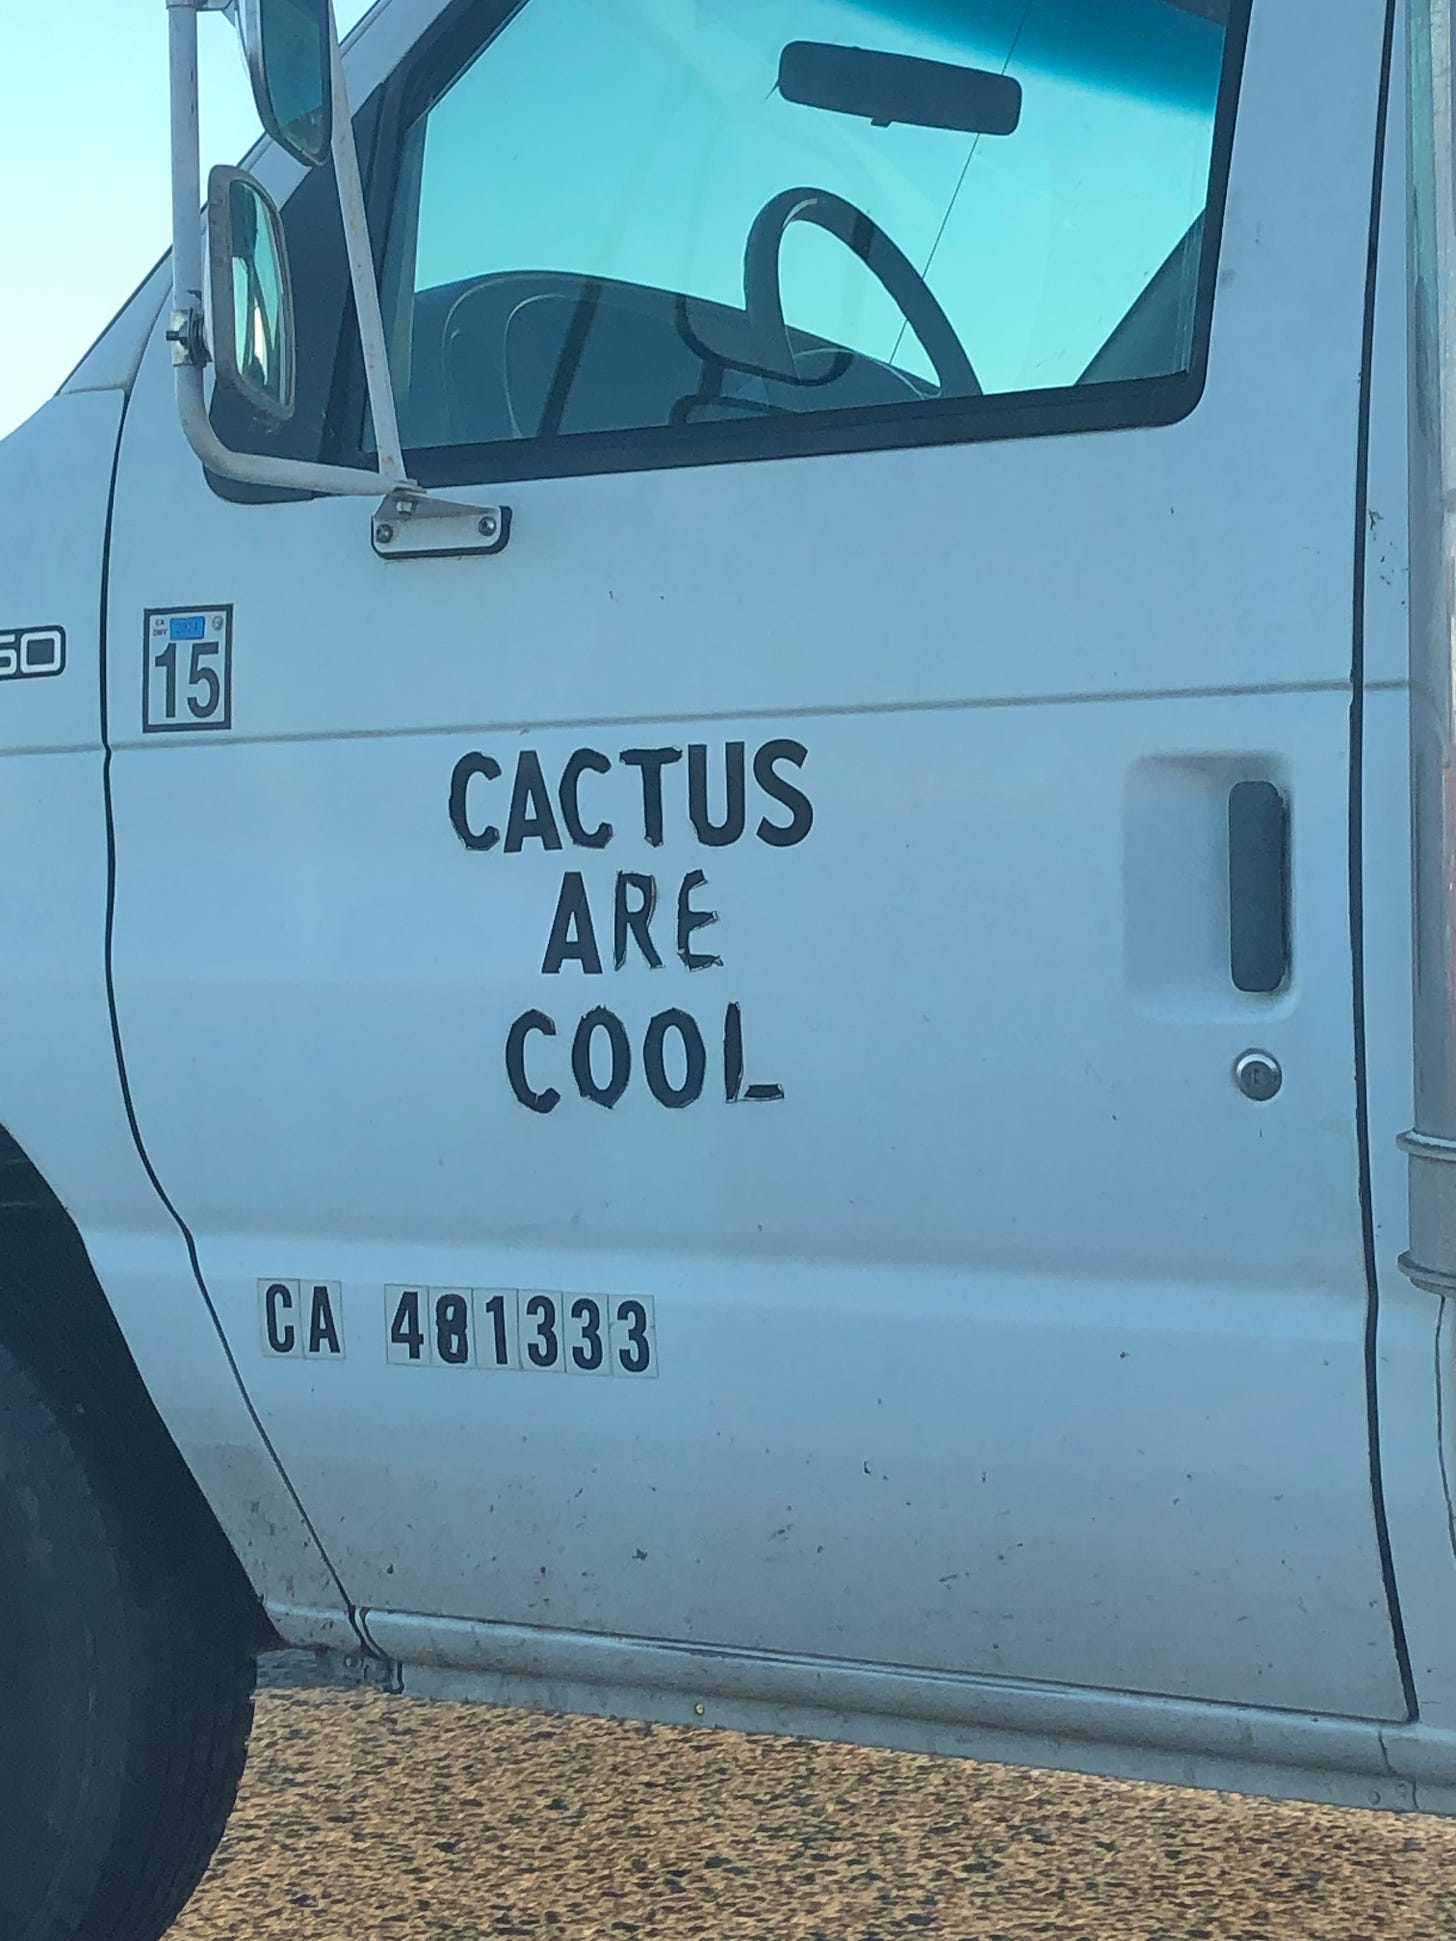 A truck door with the words “Cactus are Cool” painted on it.